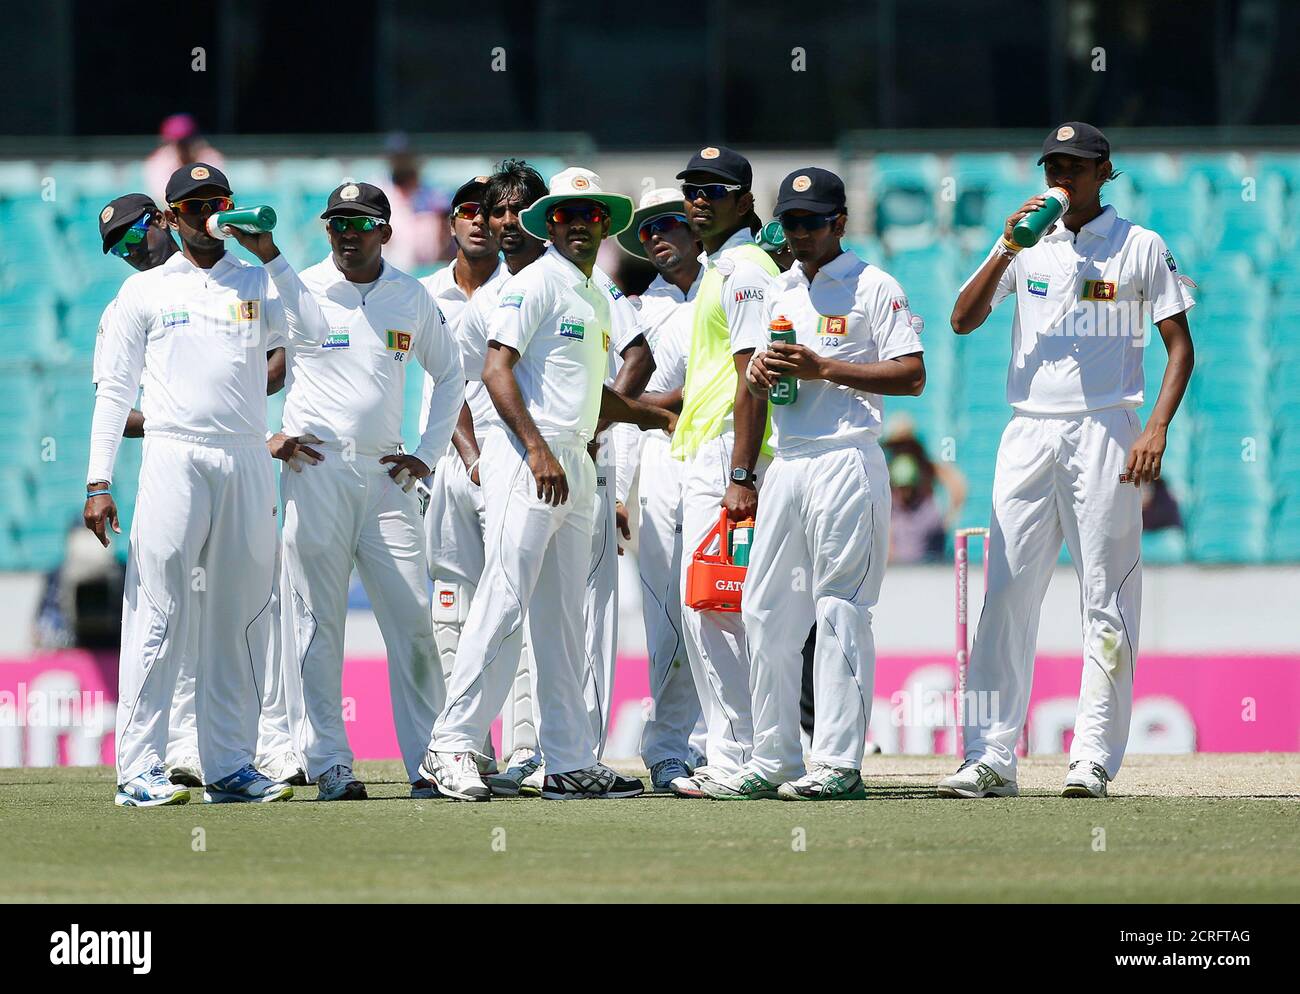 Sri Lanka players look at a scoreboard as they wait for a third umpire's decision during the third day's play of the third cricket test match against Australia at the Sydney Cricket Ground January 5, 2013.         REUTERS/Tim Wimborne (AUSTRALIA - Tags: SPORT CRICKET) Stock Photo